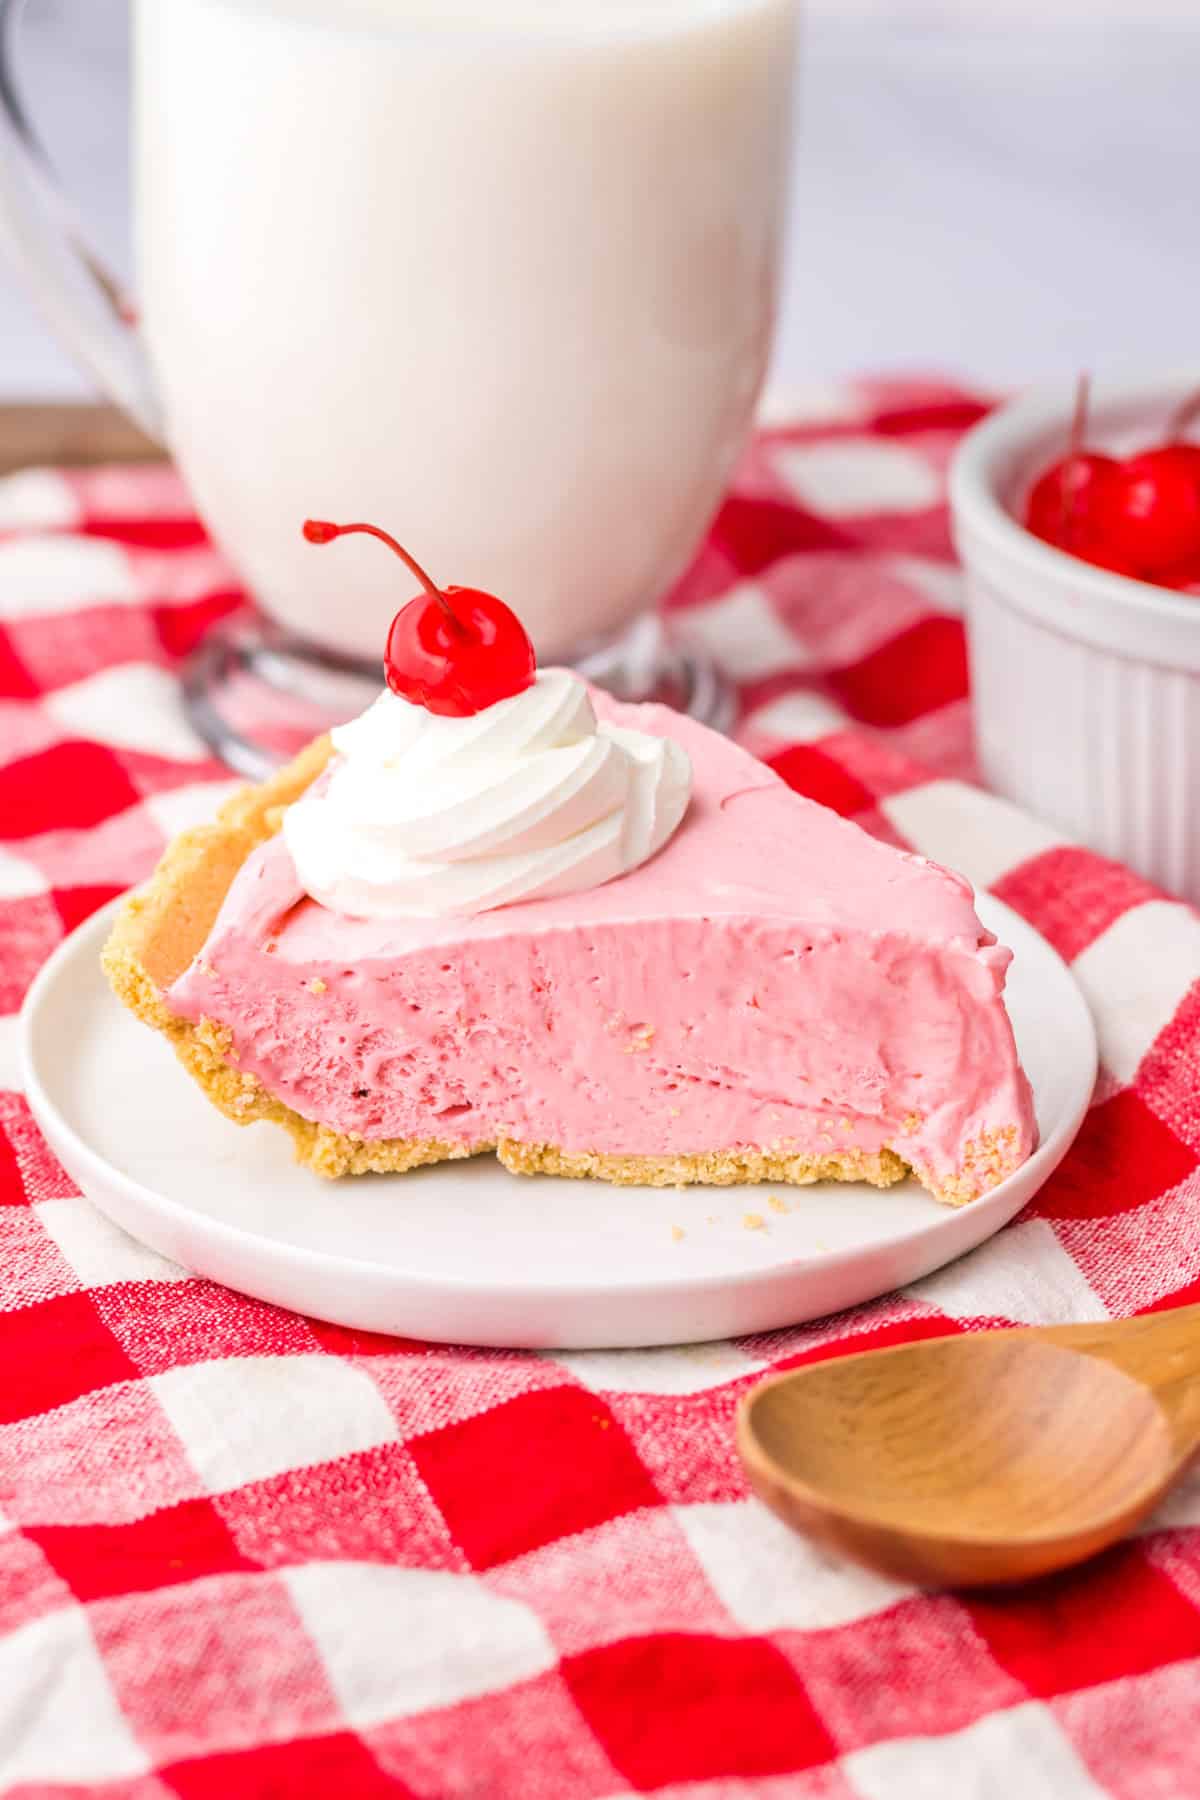 Slice of cherry cool aid pie on white plate with large glass of milk in the background.